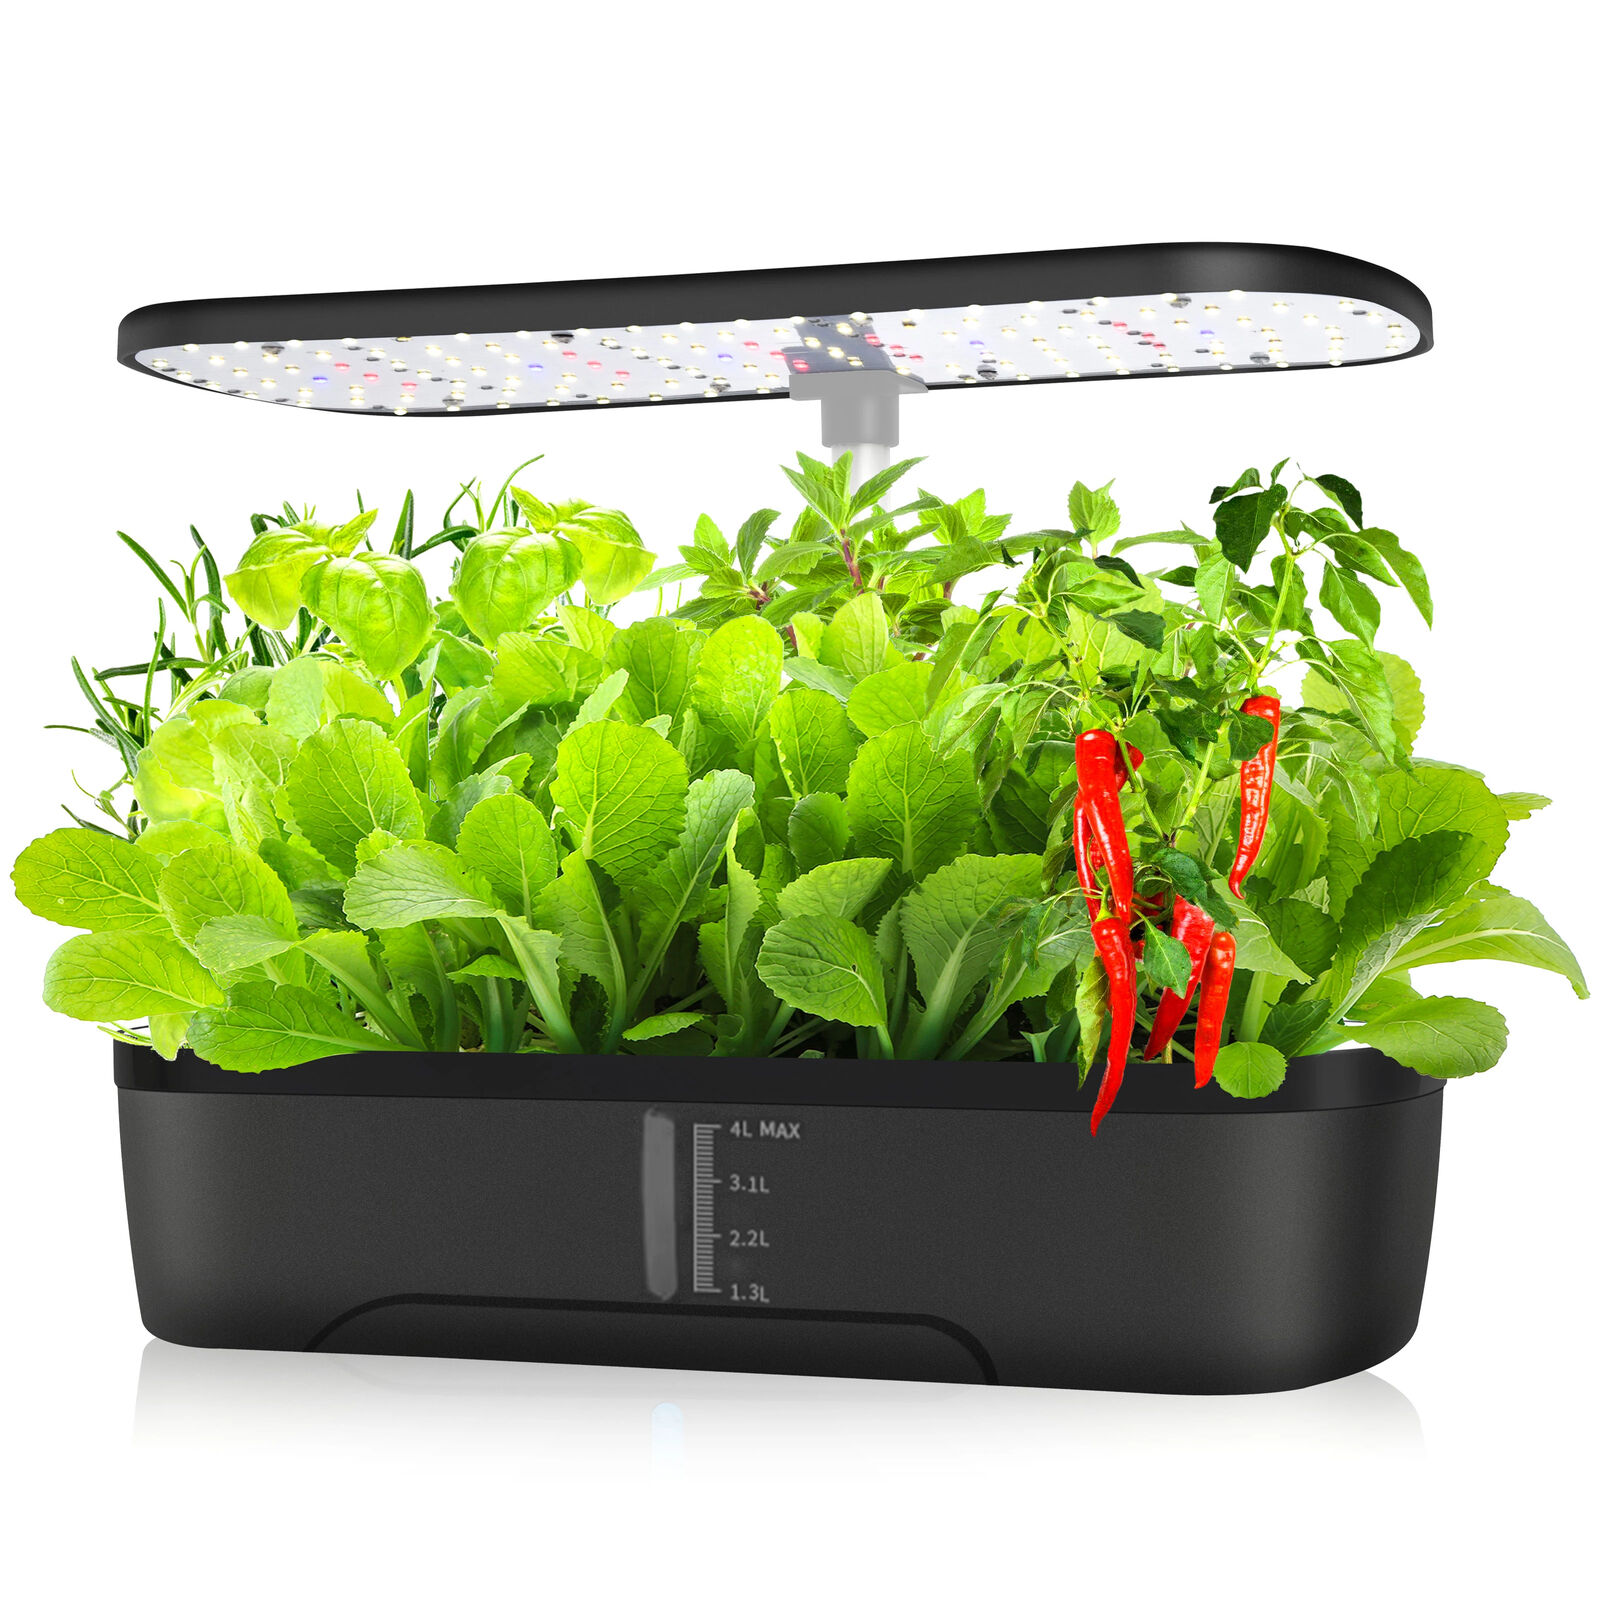 12 Pods Hydroponics Growing System Indoor Herb Garden Grow Light Timer LED Grow